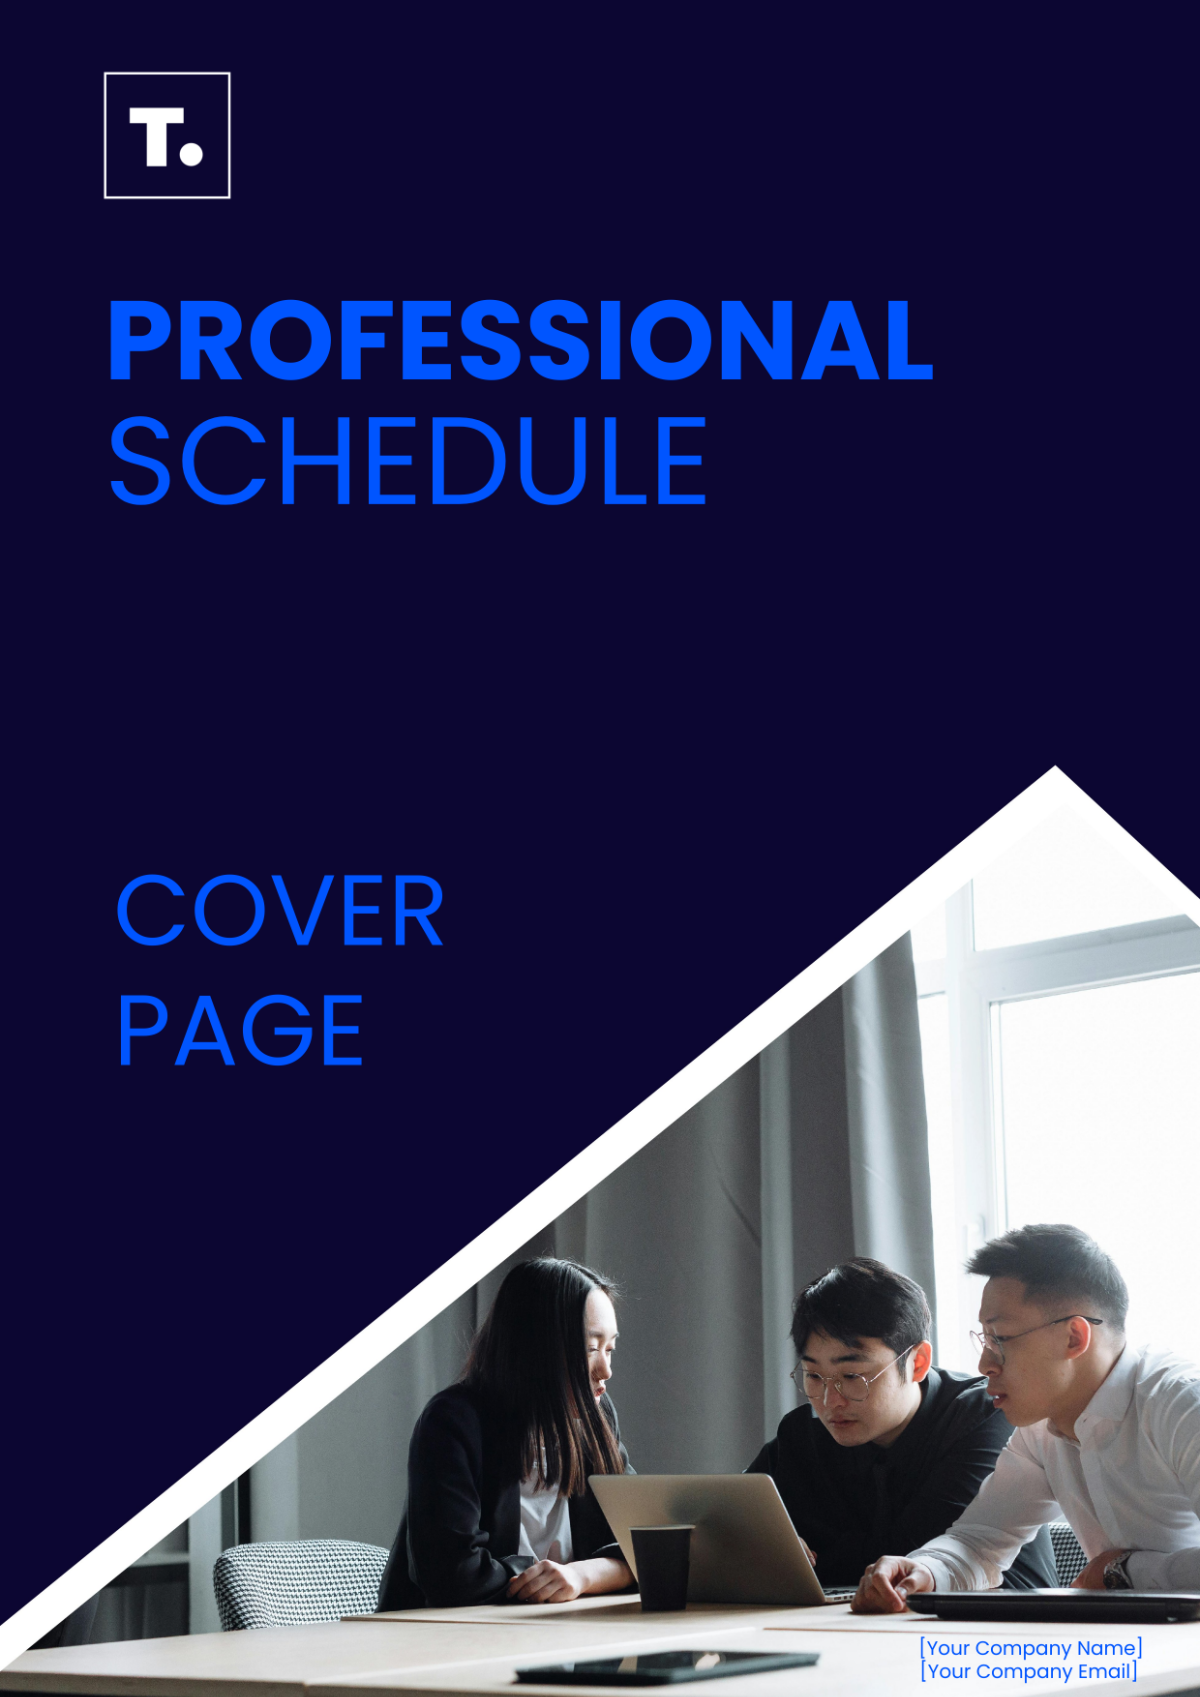 Professional Schedule Cover Page